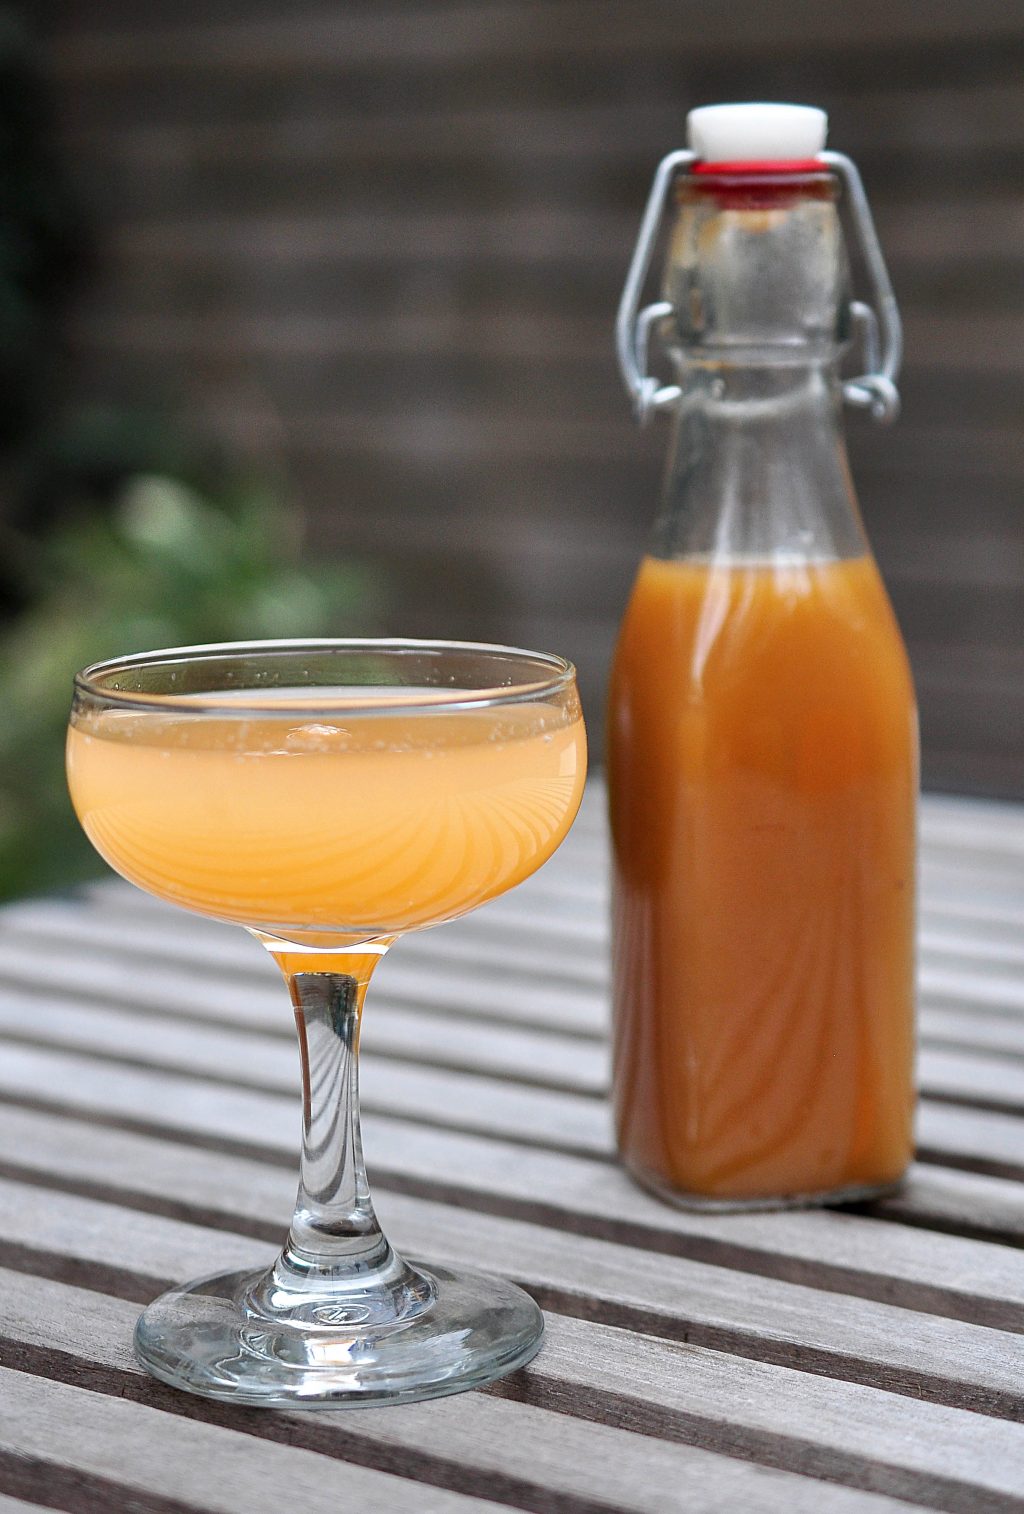 grapefruit-drink-and-syrup